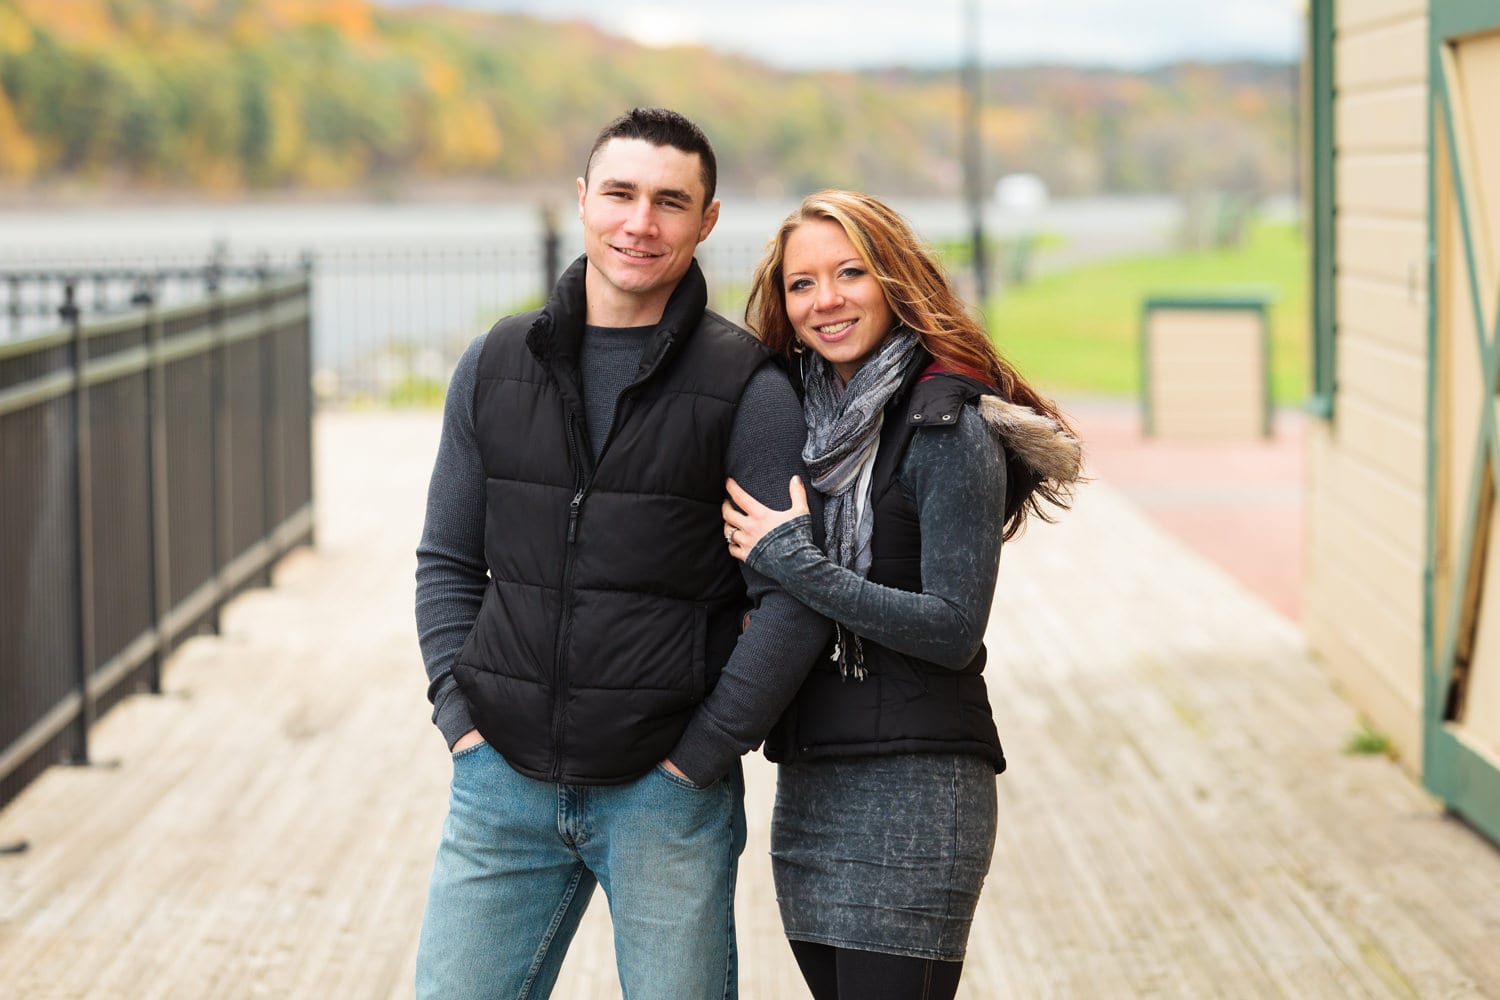 004-catskill_point_engagement_photography